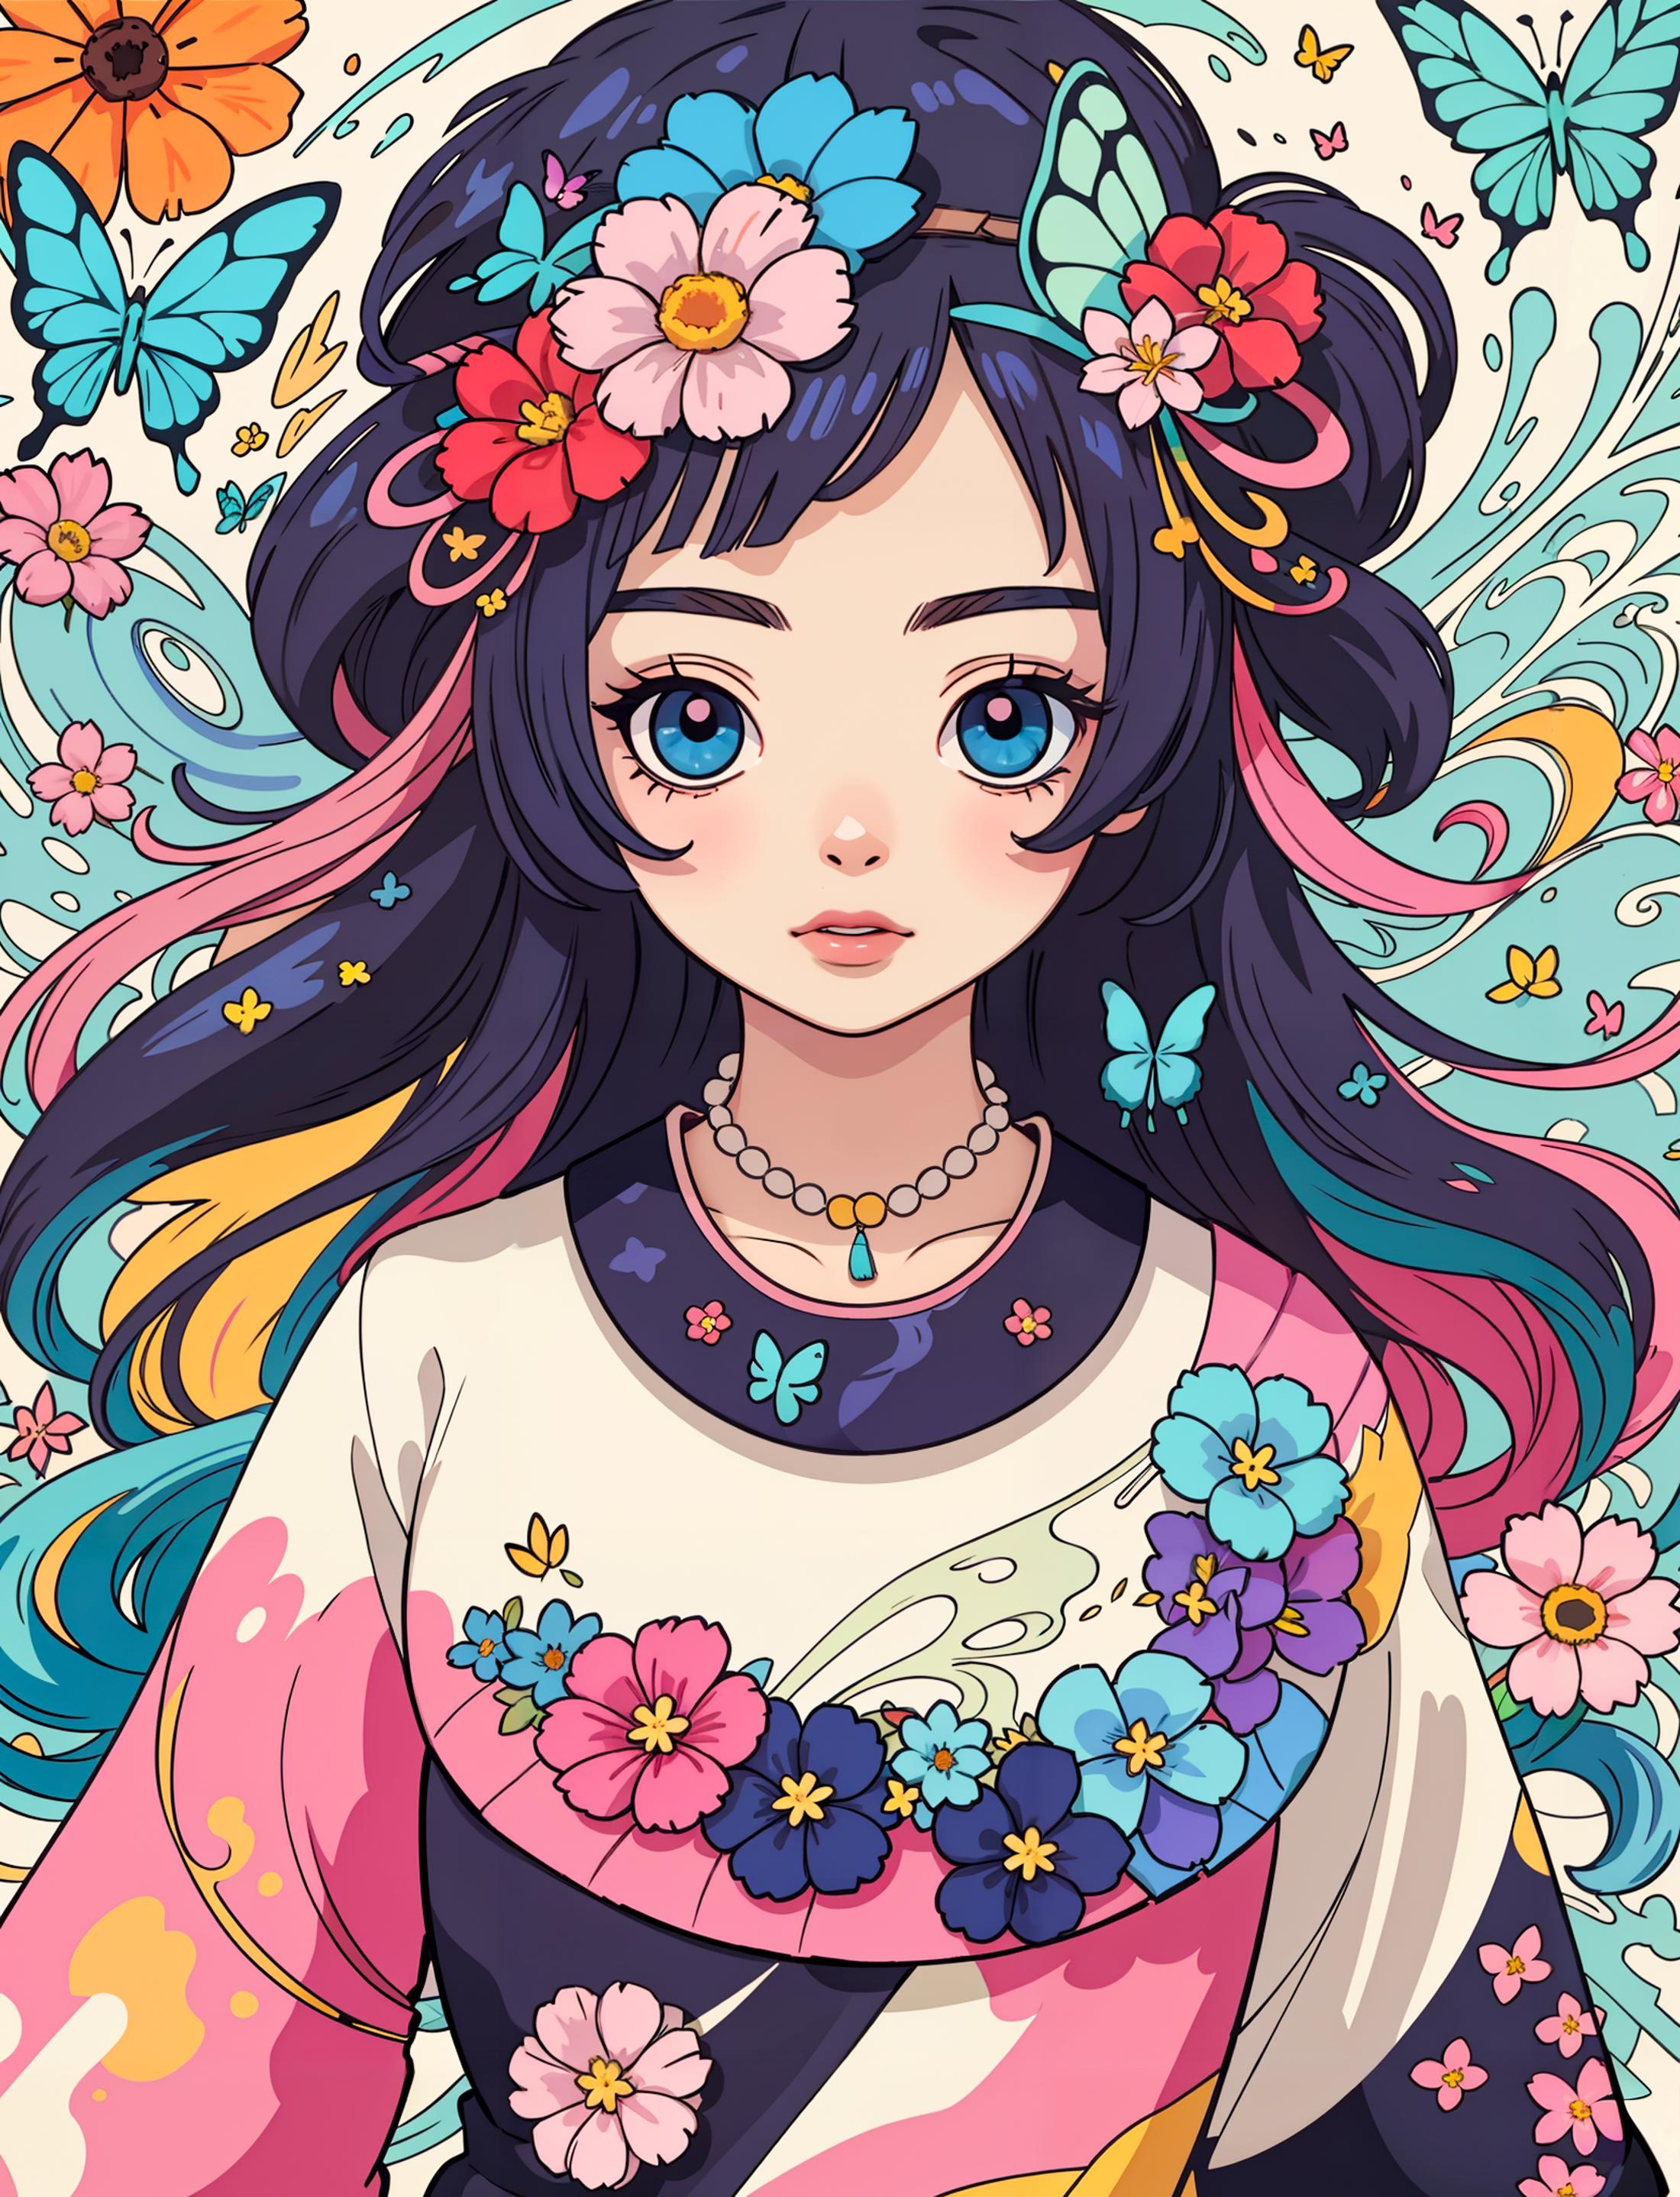 Anime-style illustration of a girl with flowers in her hair and a blue dress.